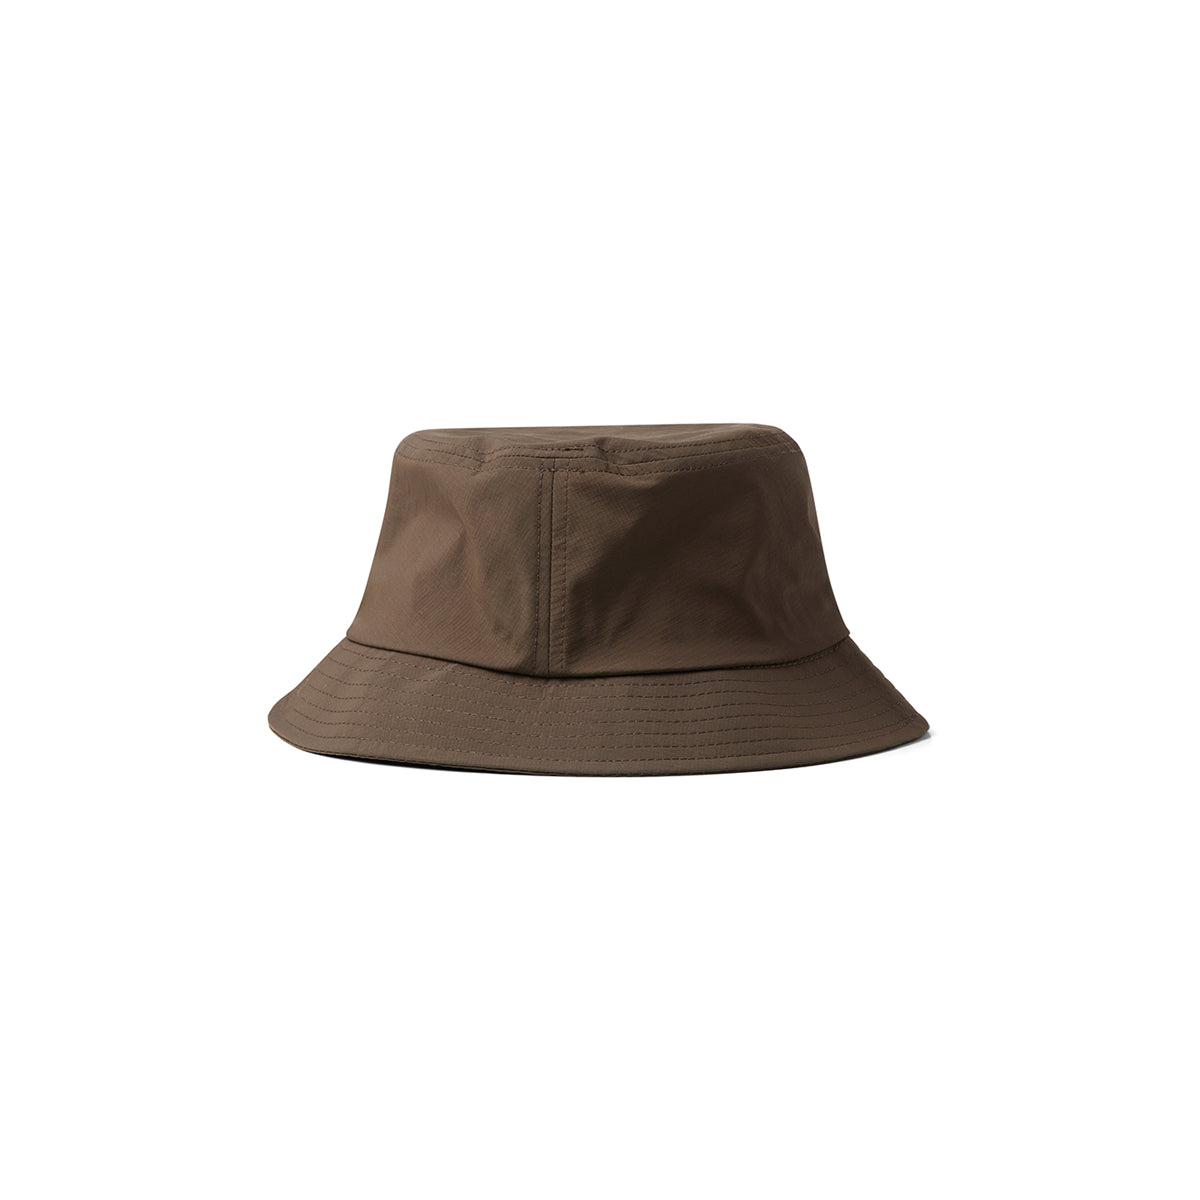 Track Day Bucket Hat Military